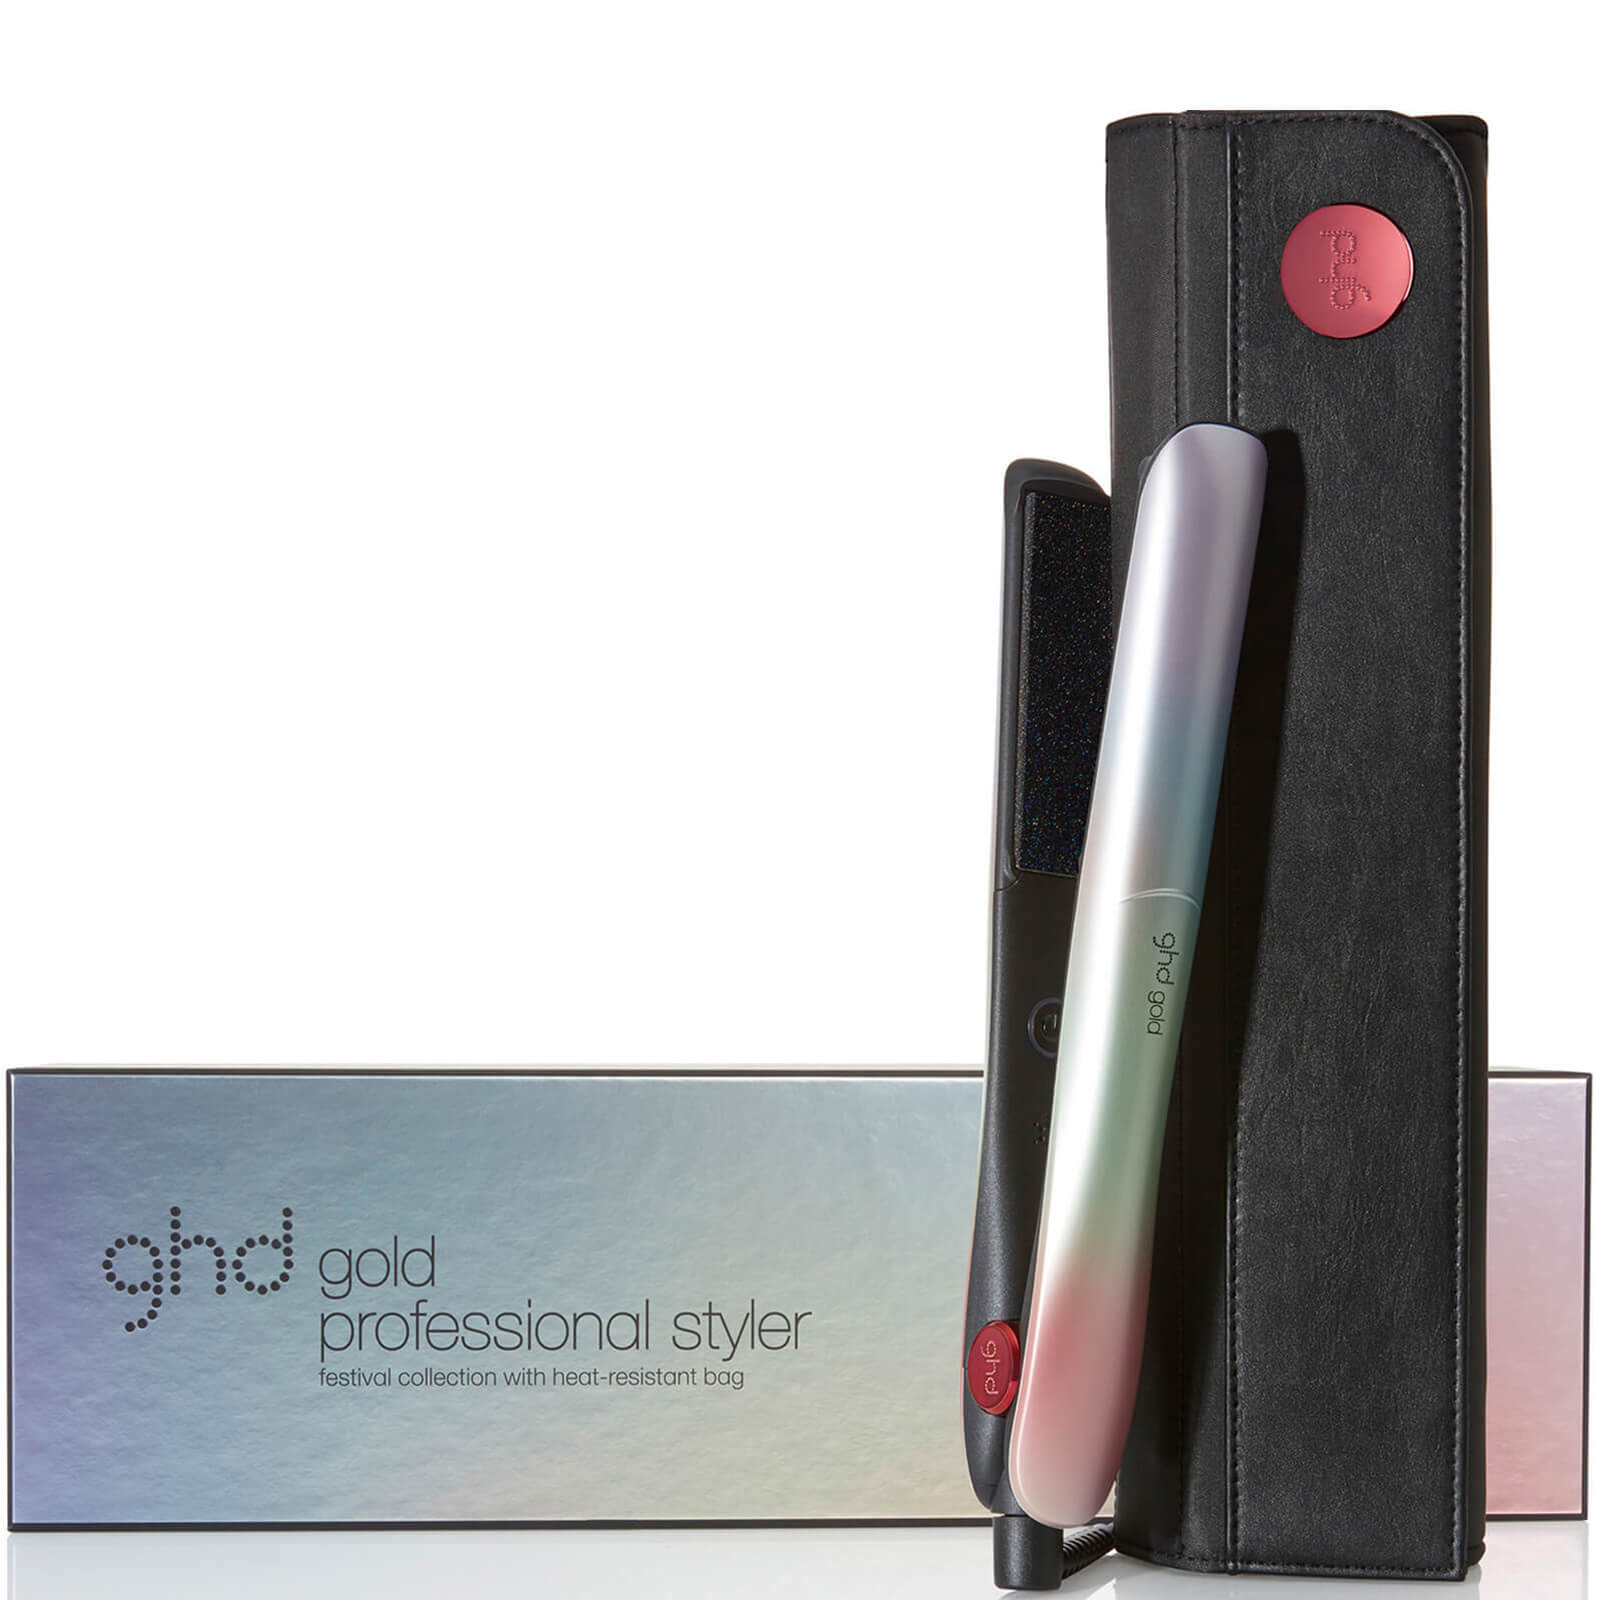 ghd Gold® Styler Festival Collection